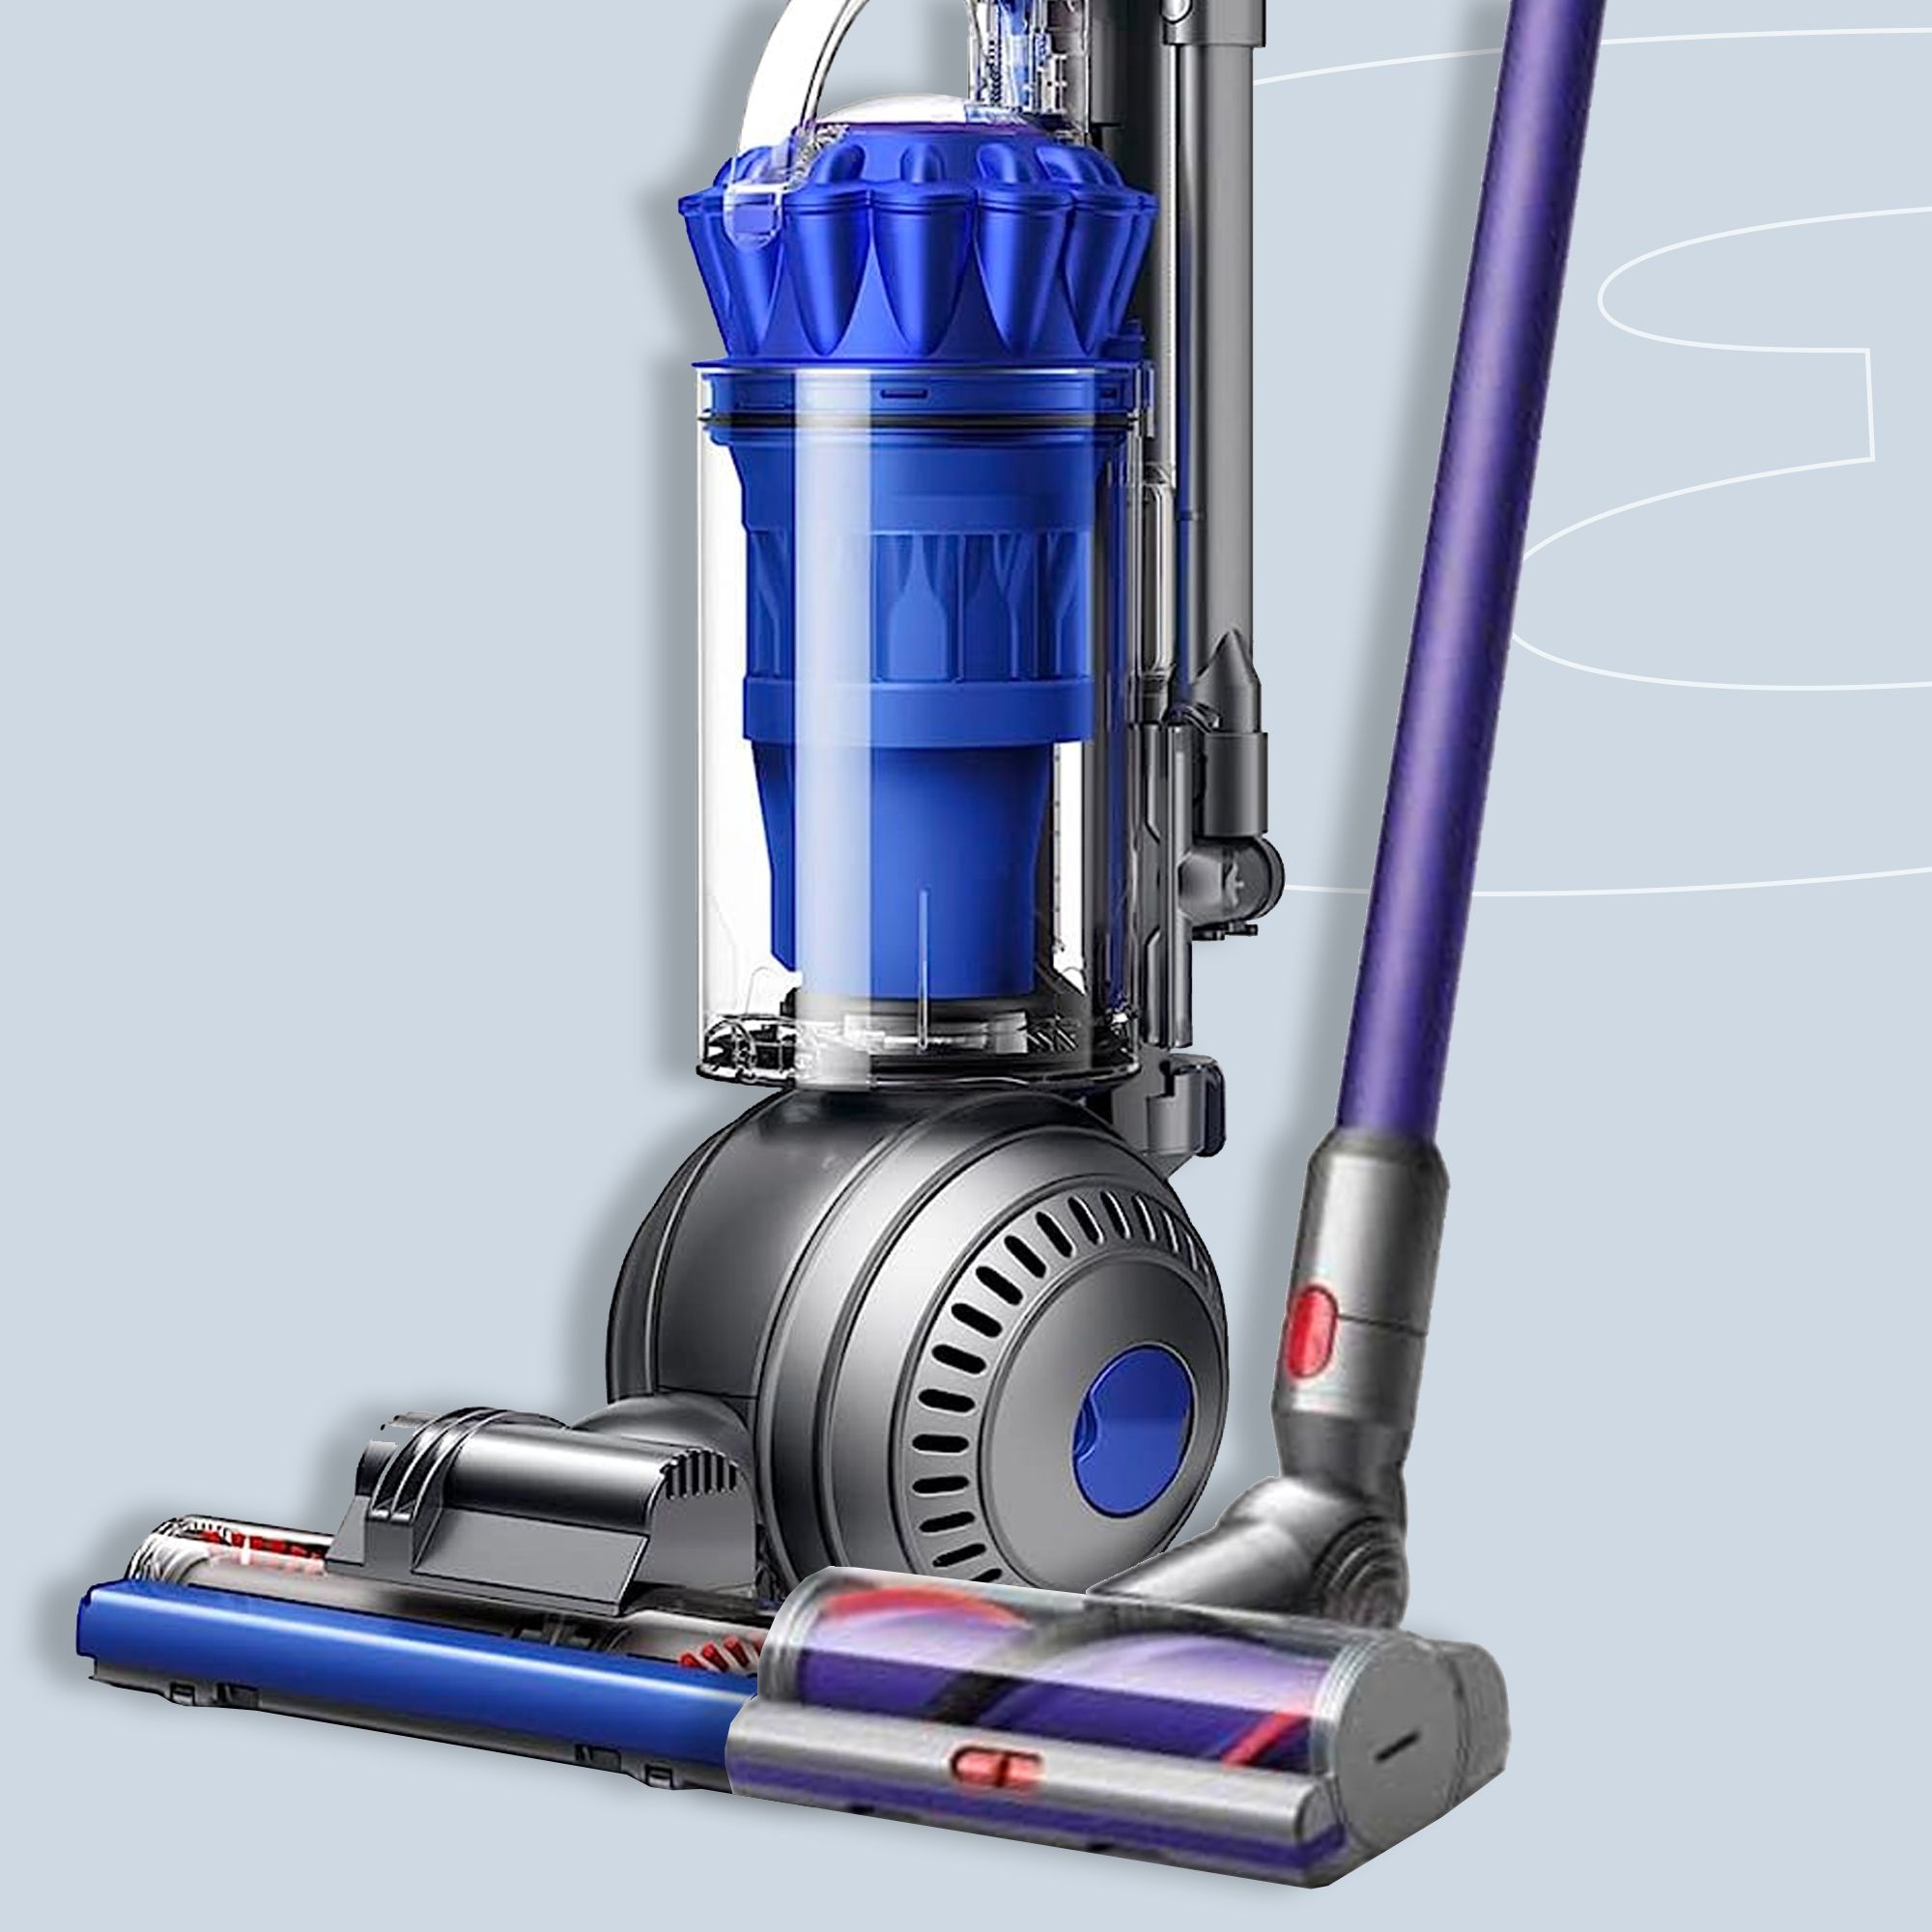 Dyson's Top Vacuums Are Up to $350 Off Right Now